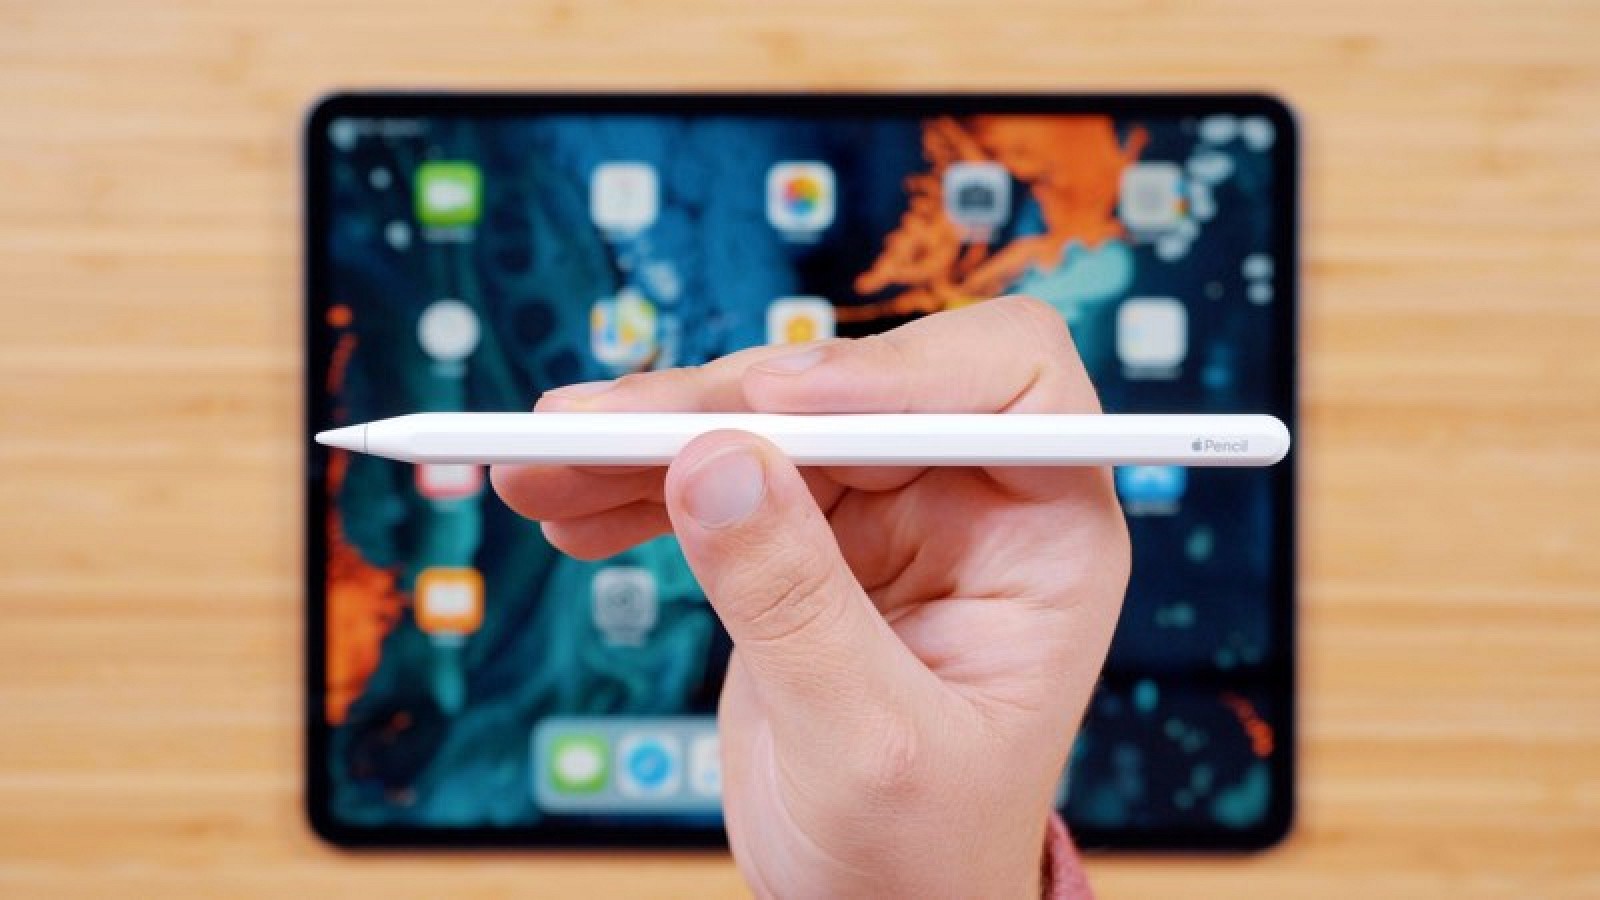 Third-Party Devs Will Be Able to Access iPadOS Apple Pencil Latency Improvements for Art Apps